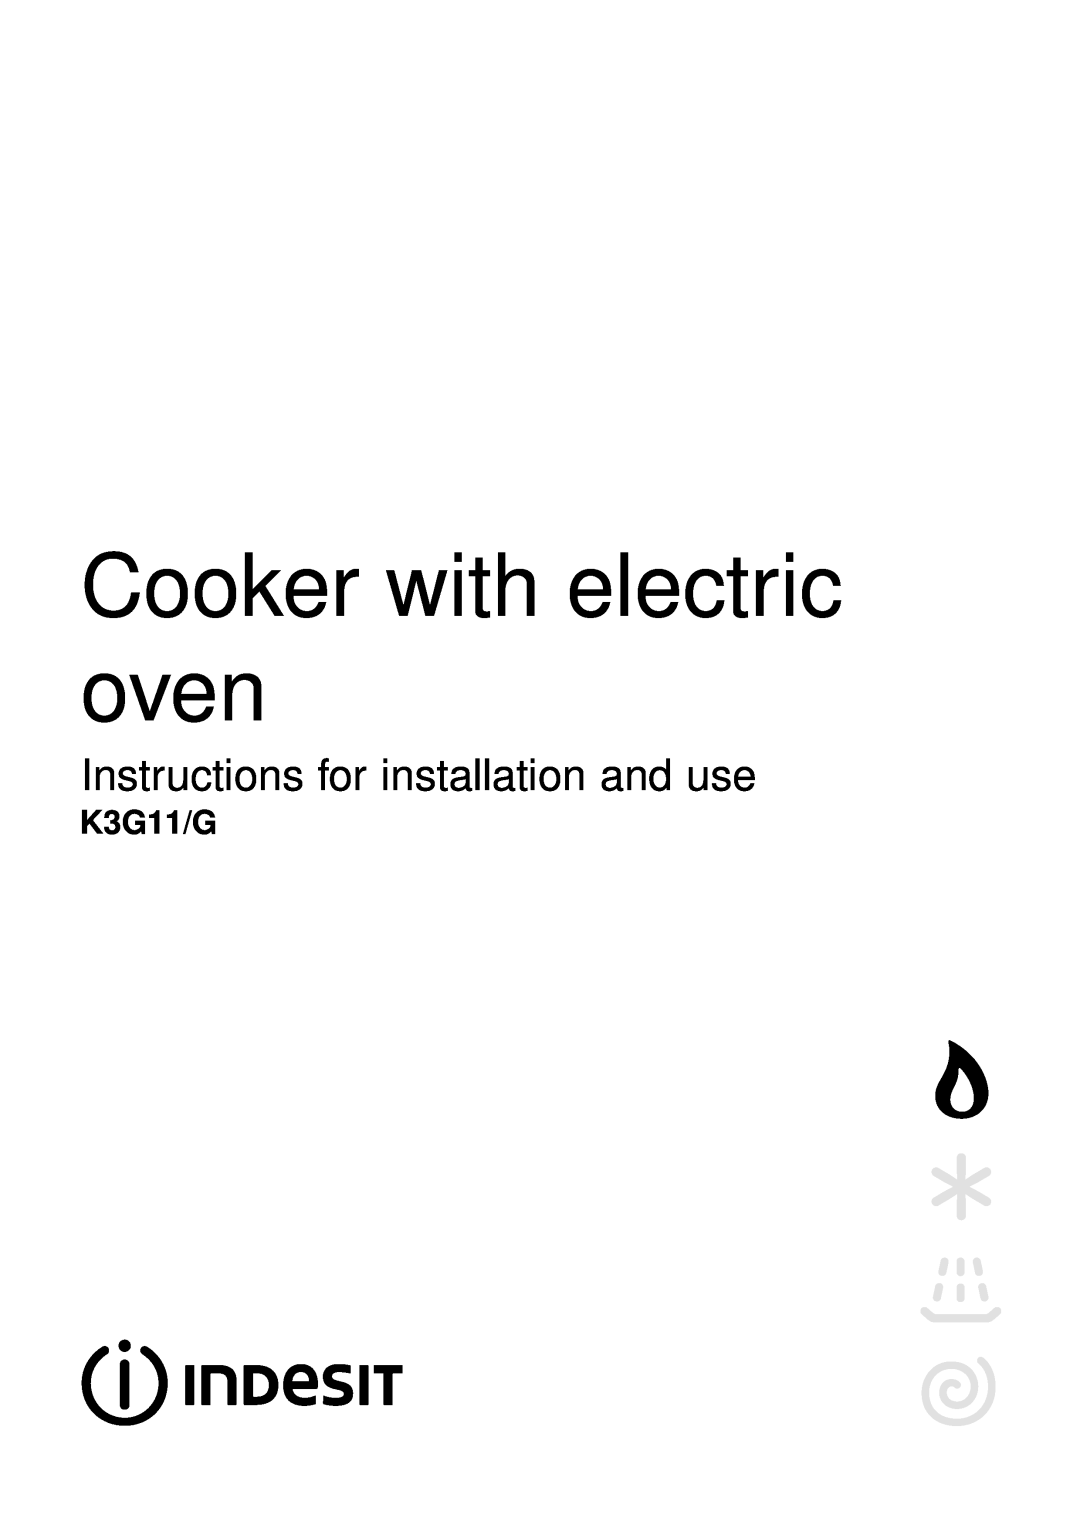 Indesit K3G11/G manual Cooker with electric oven, Instructions for installation and use 